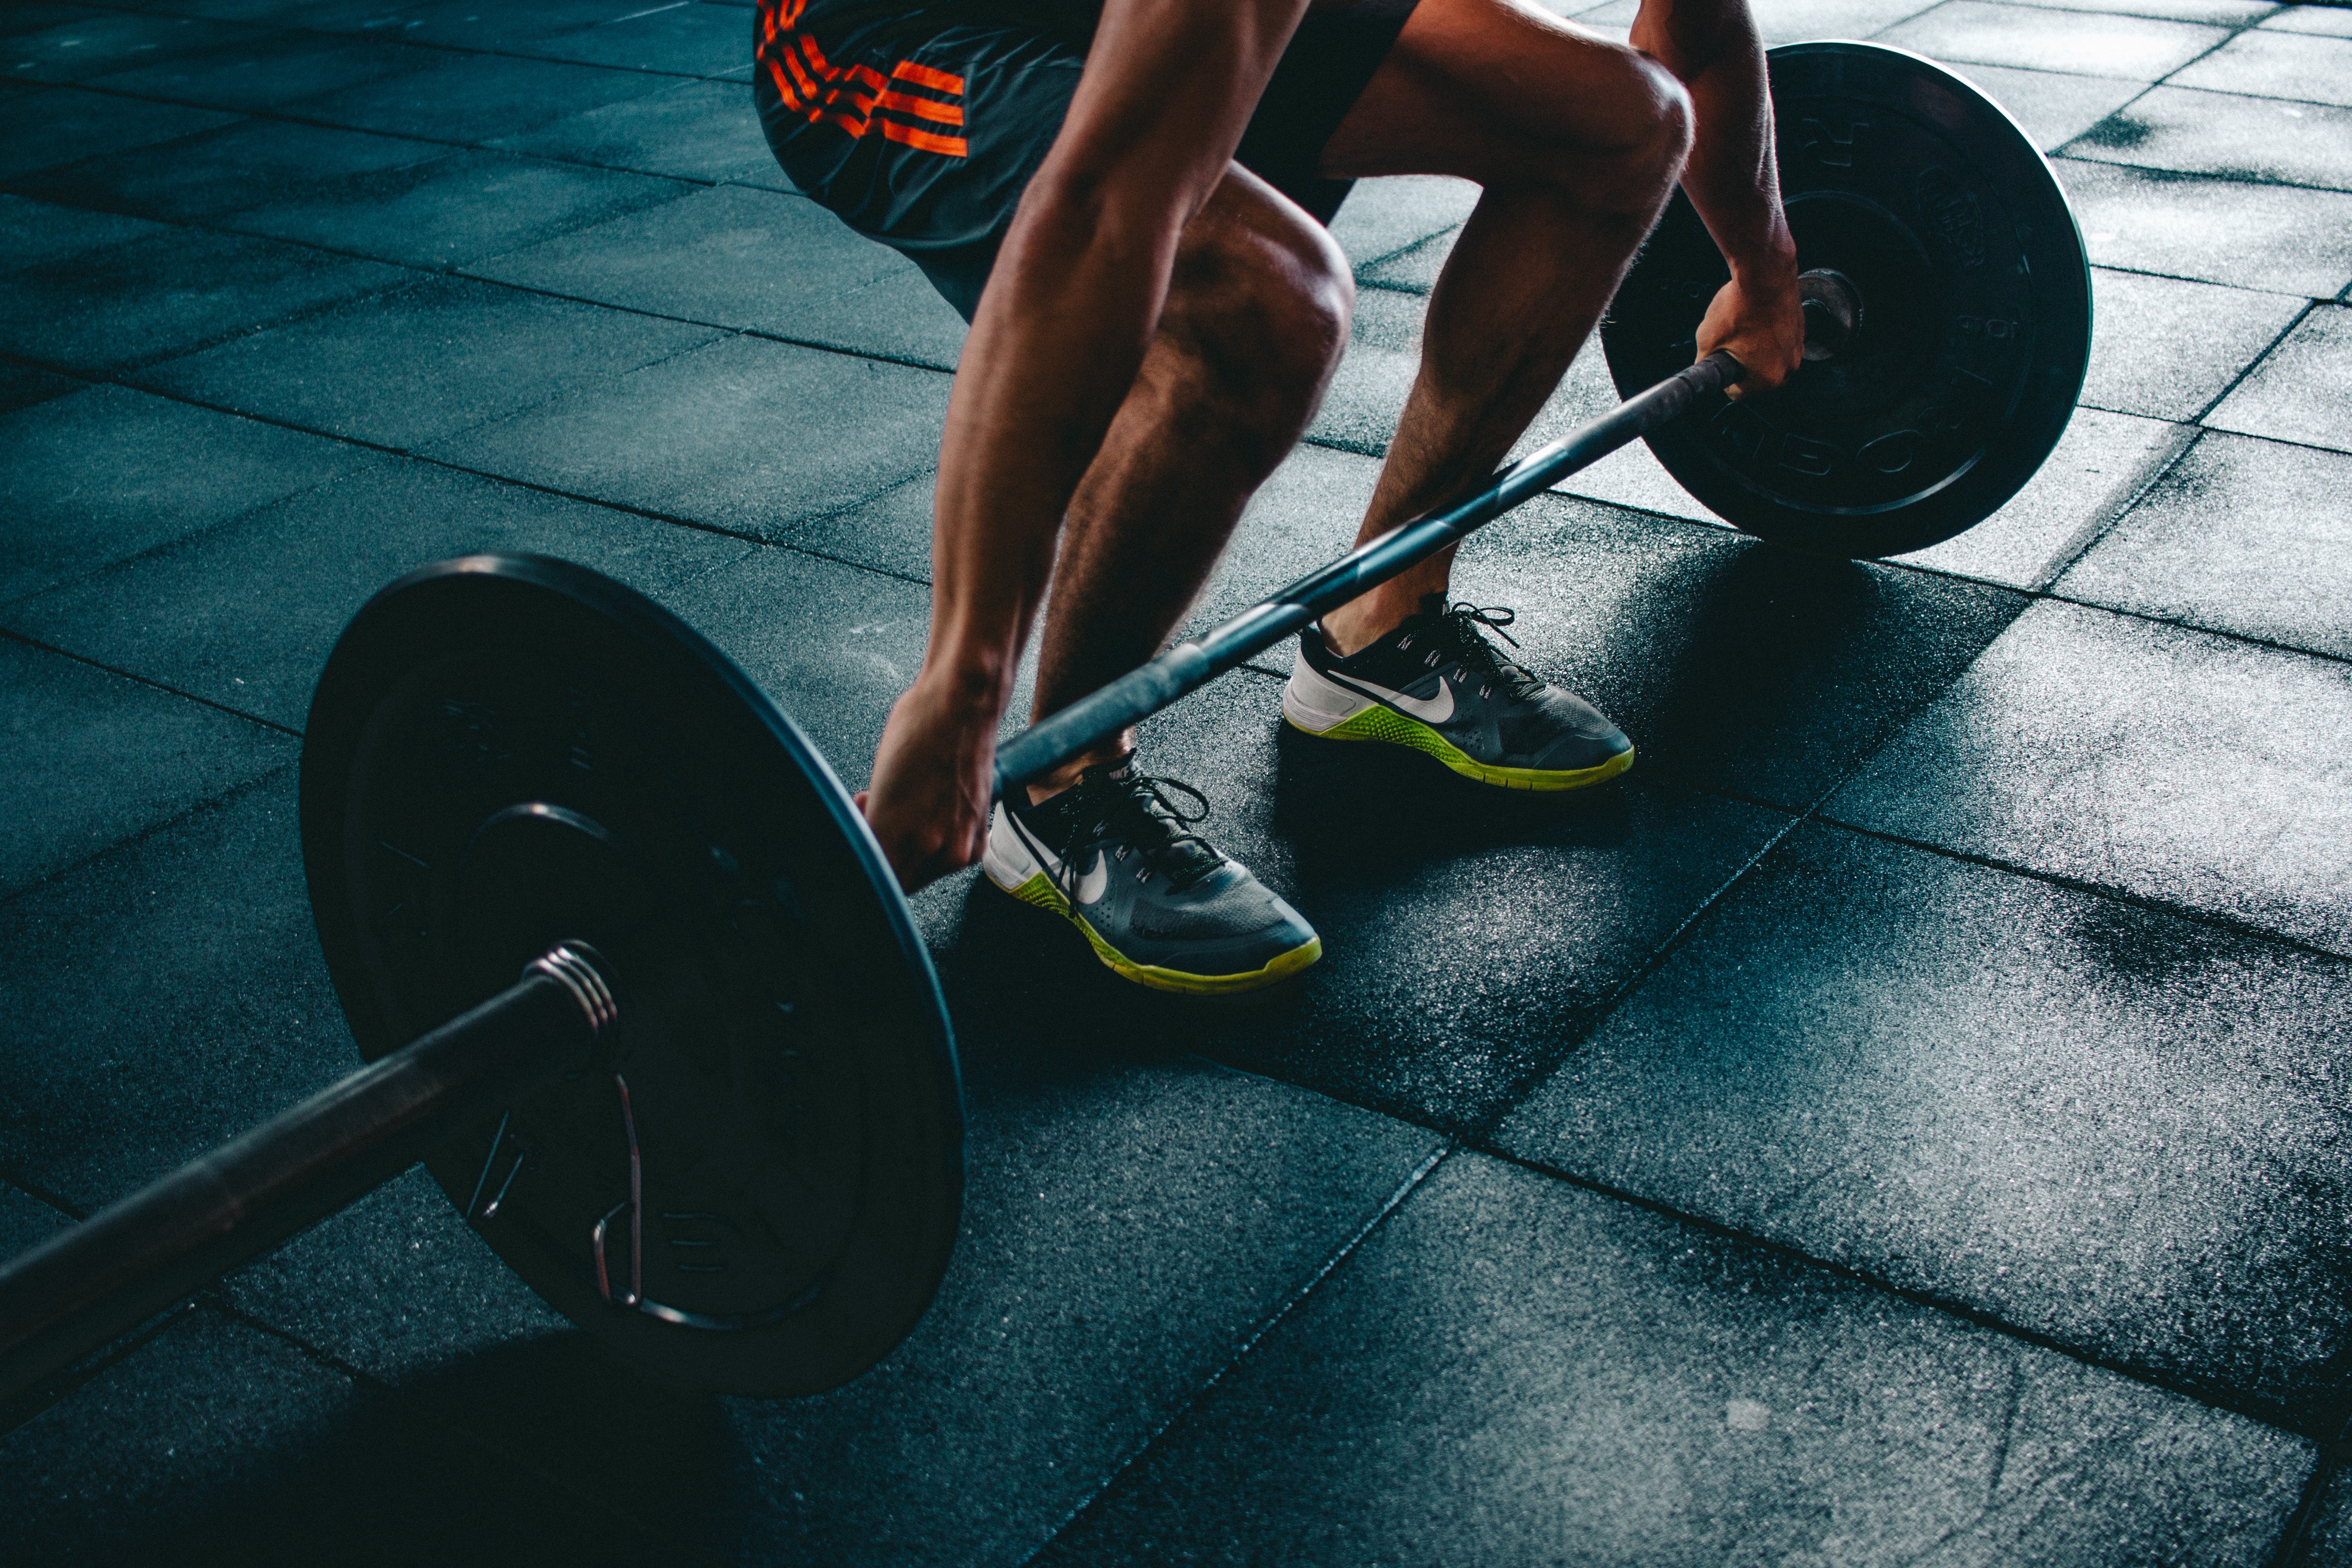 Deadlift: Getting Deeply Curious at the Positivity Gym